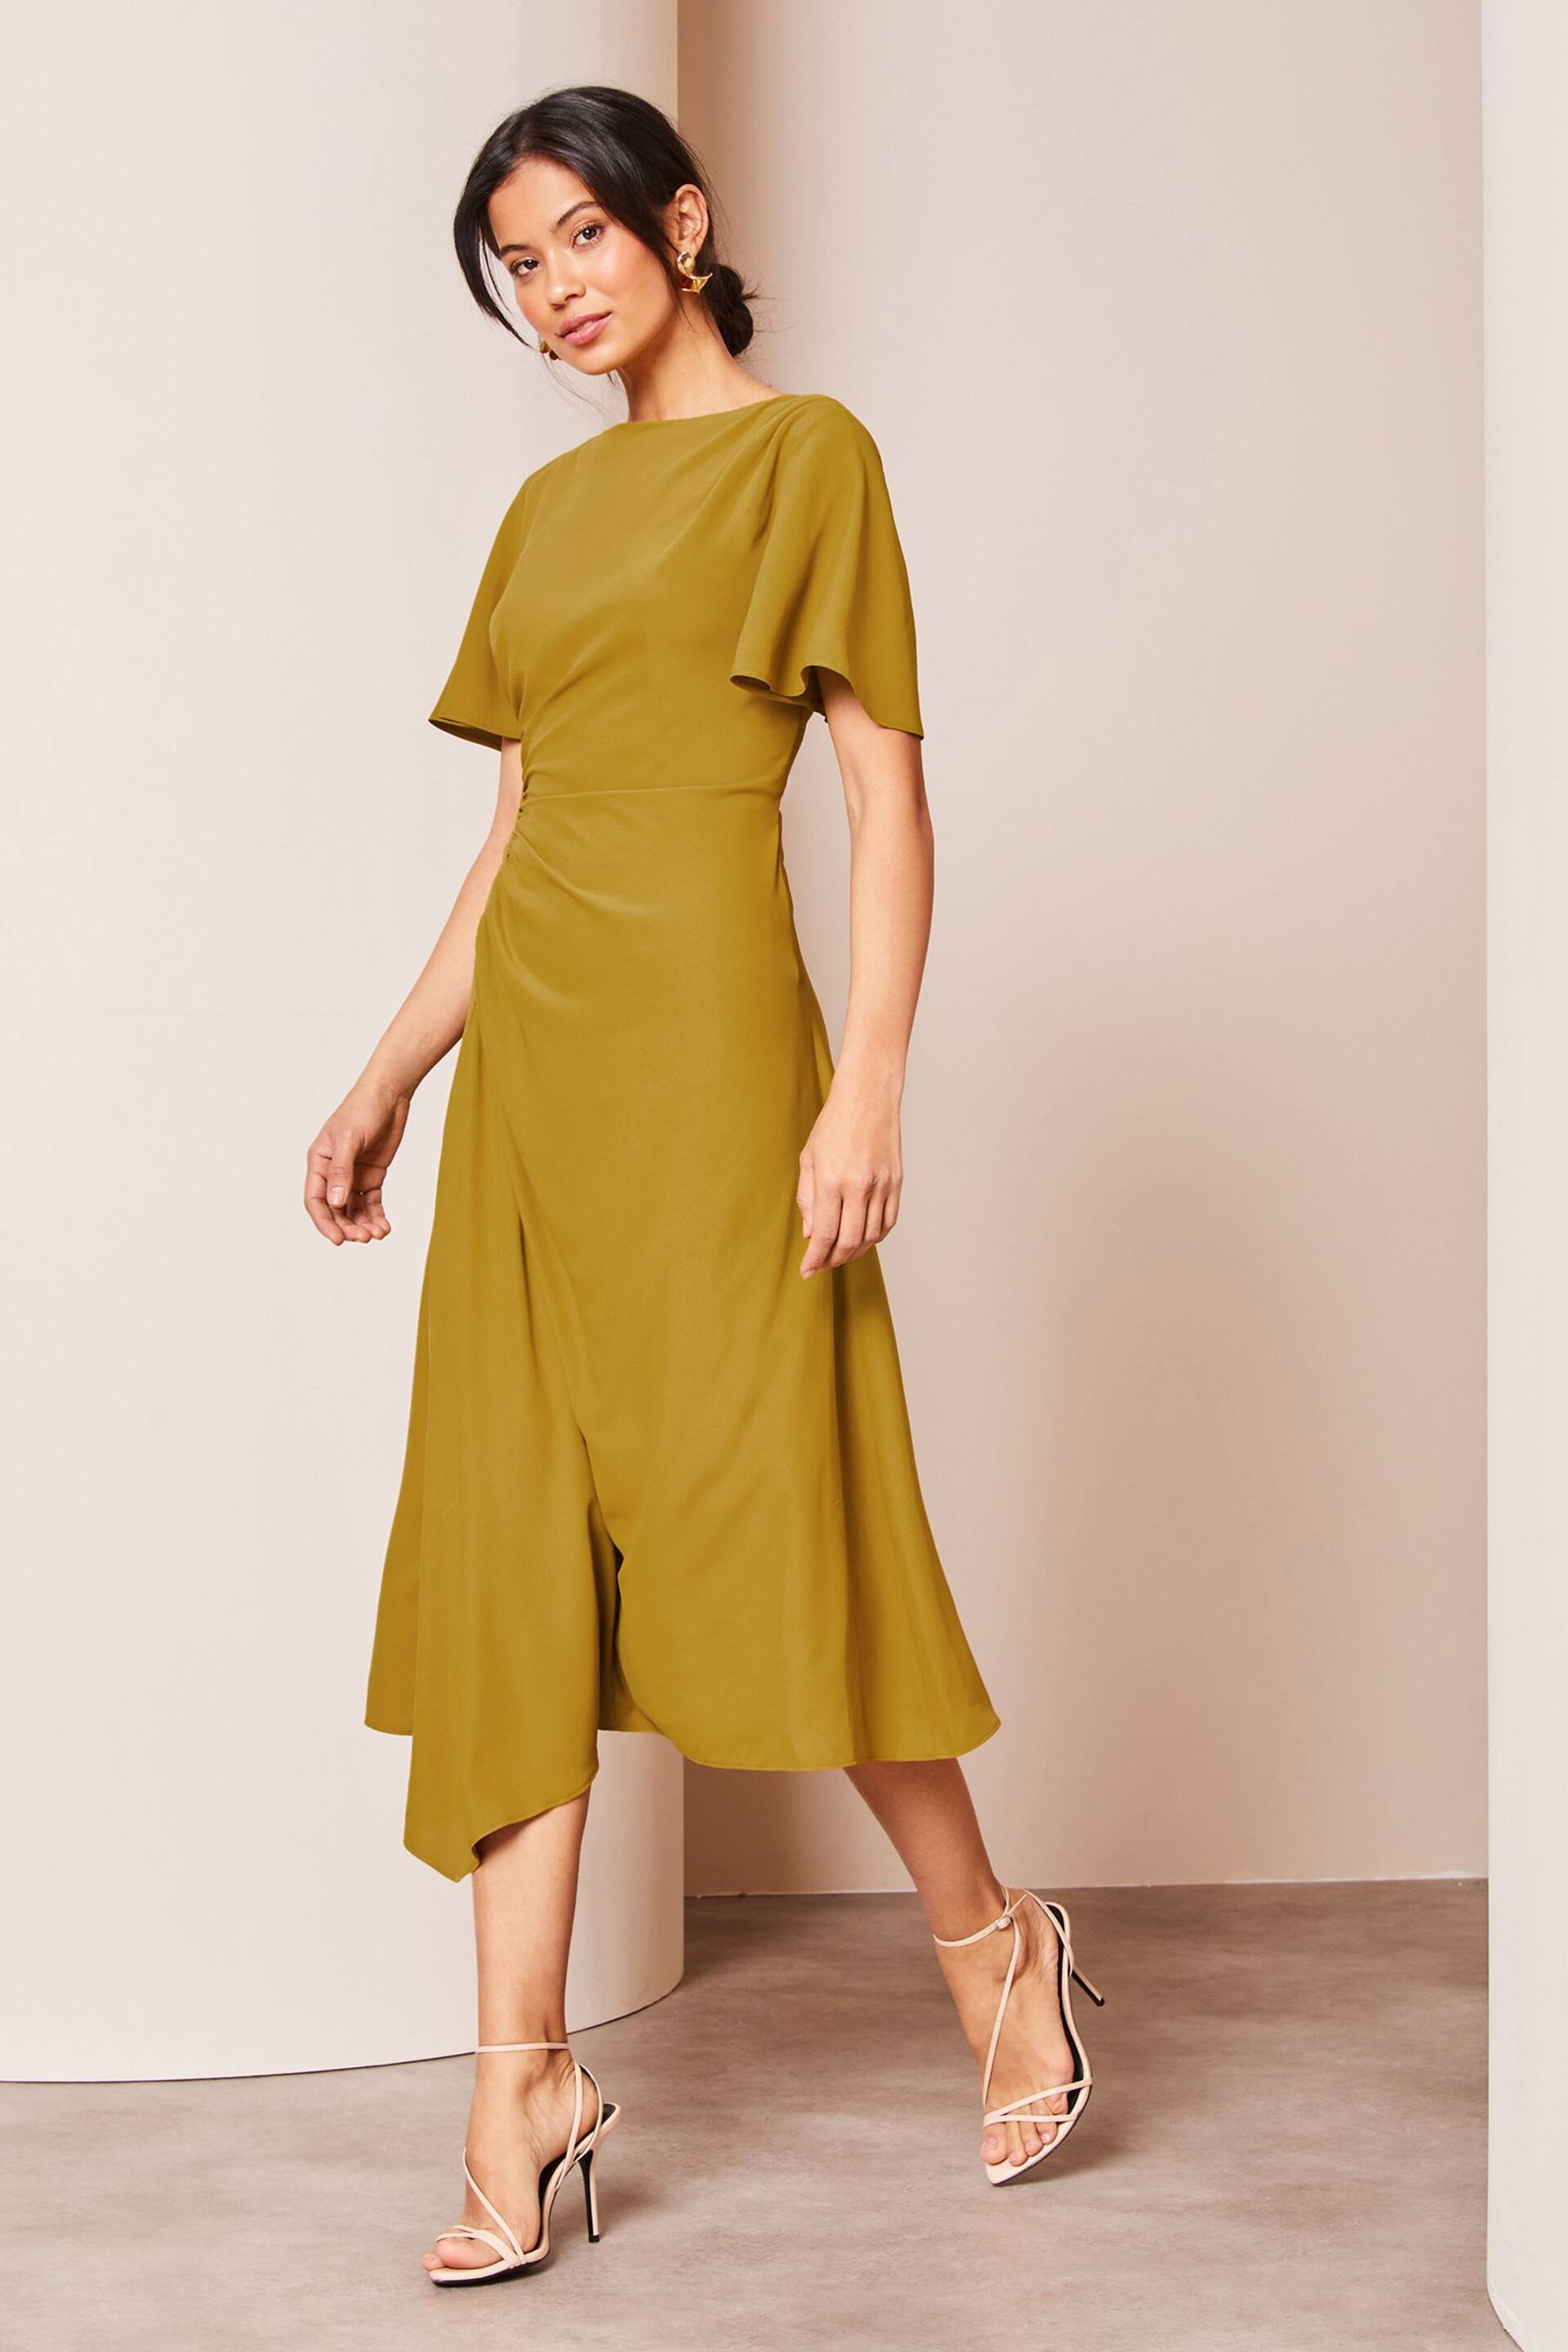 Lipsy Green Petite Ruched Asymmetrical Flutter Sleeve Midi Dress - Image 3 of 4